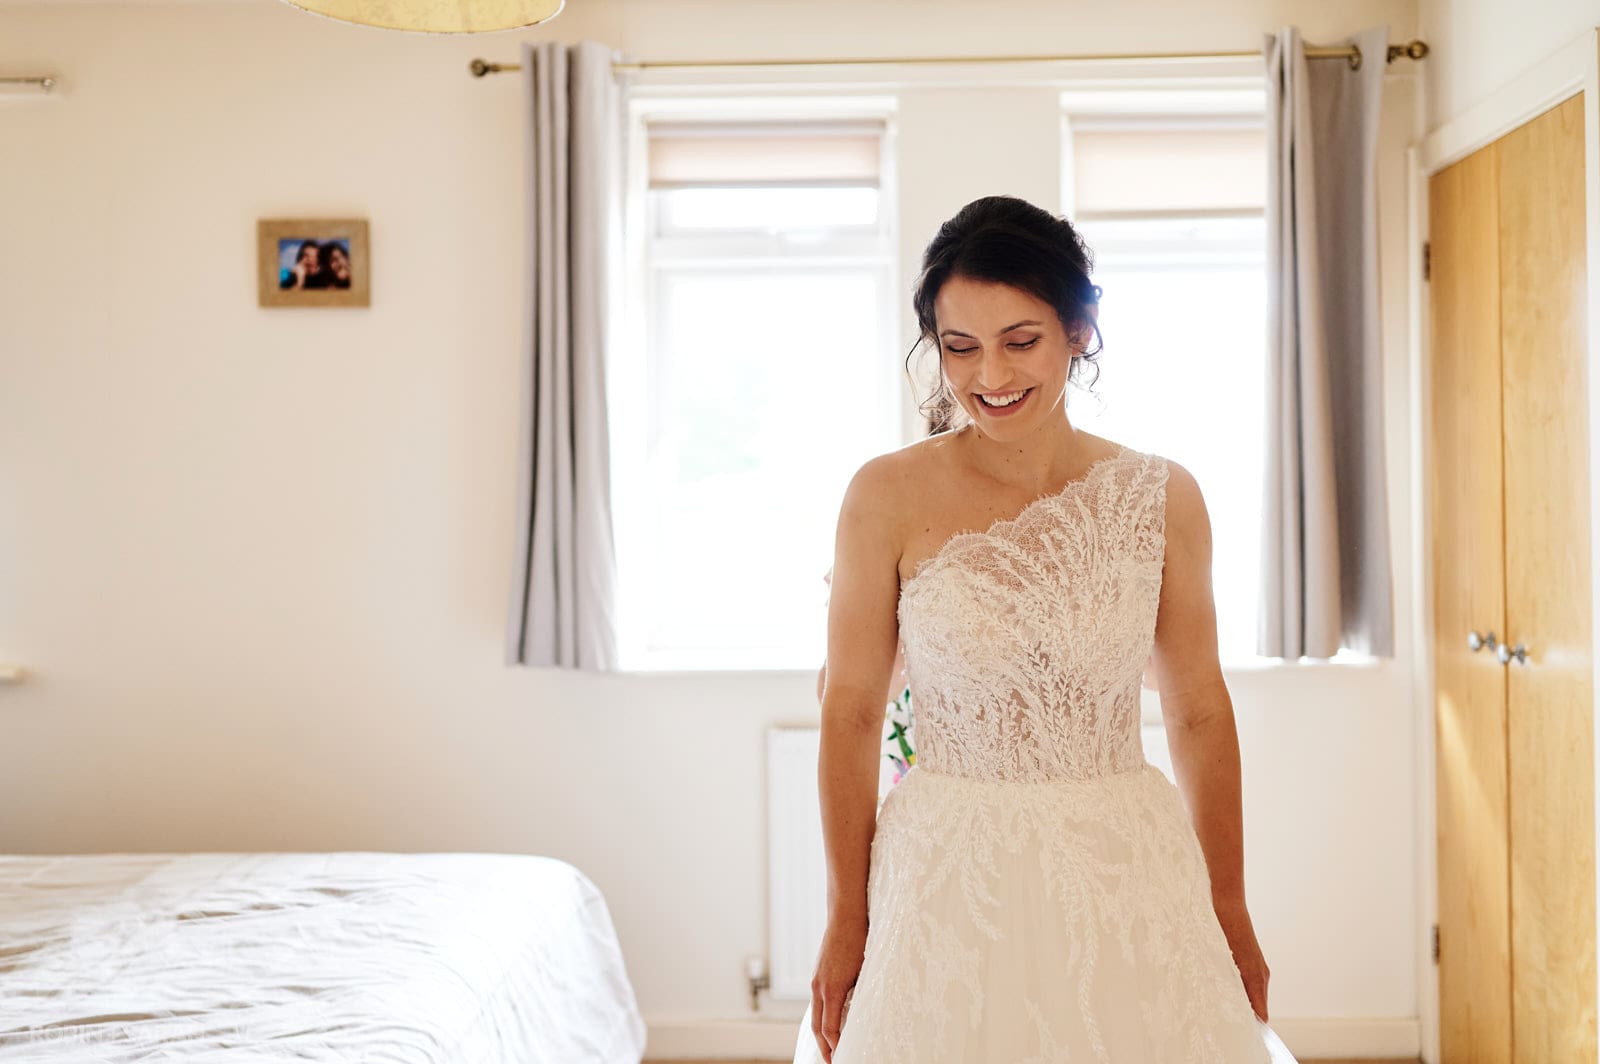 Bride smiling as her wedding dress is fastened